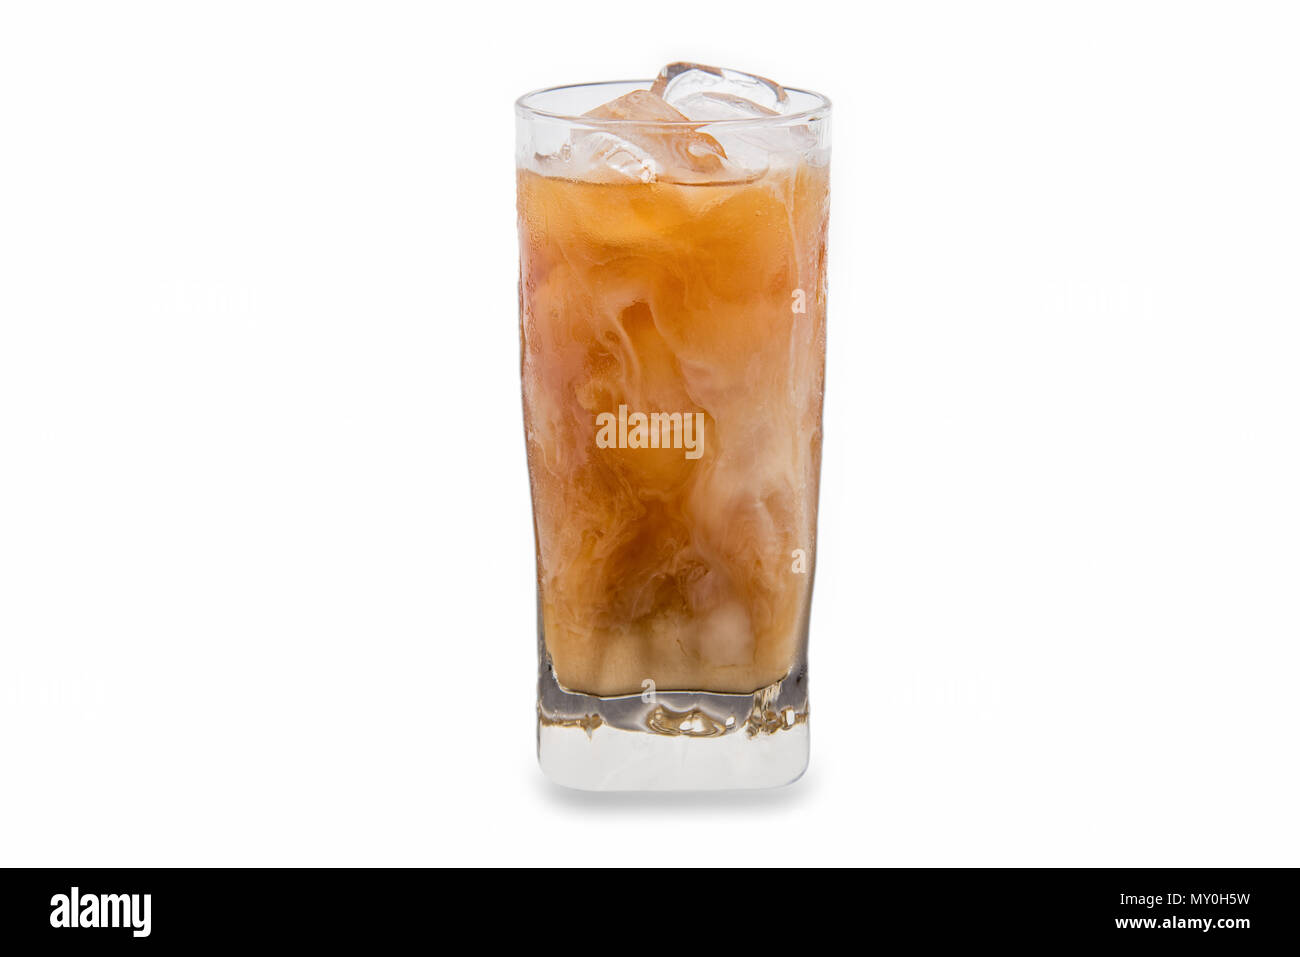 https://c8.alamy.com/comp/MY0H5W/iced-coffee-in-a-glass-isolated-and-white-background-MY0H5W.jpg